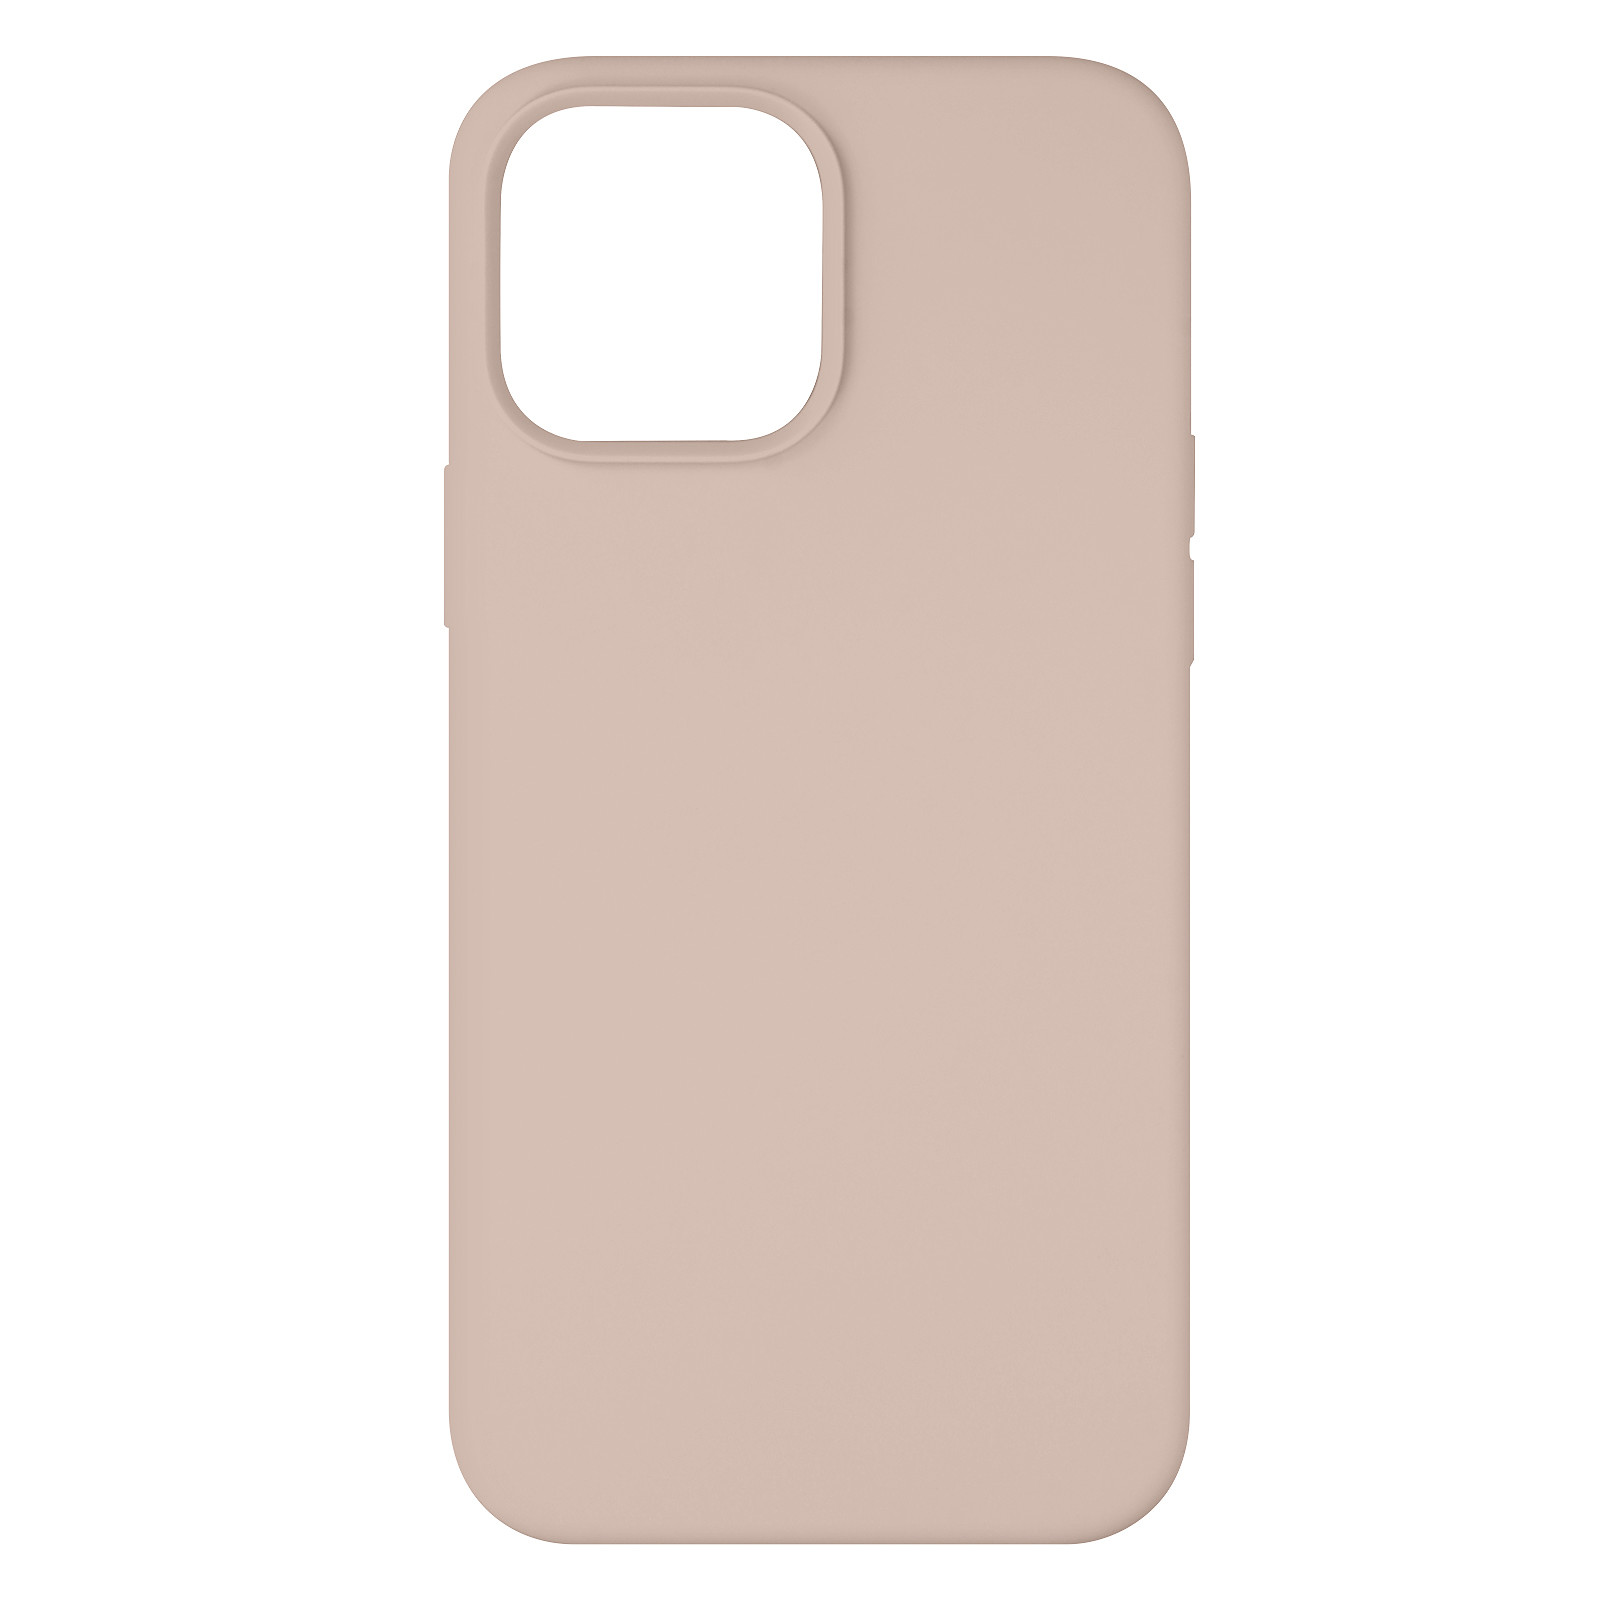 Avizar Coque pour iPhone 13 Pro Max Compatible Magsafe Finition Soft-Touch Rose pastel - Coque telephone Avizar